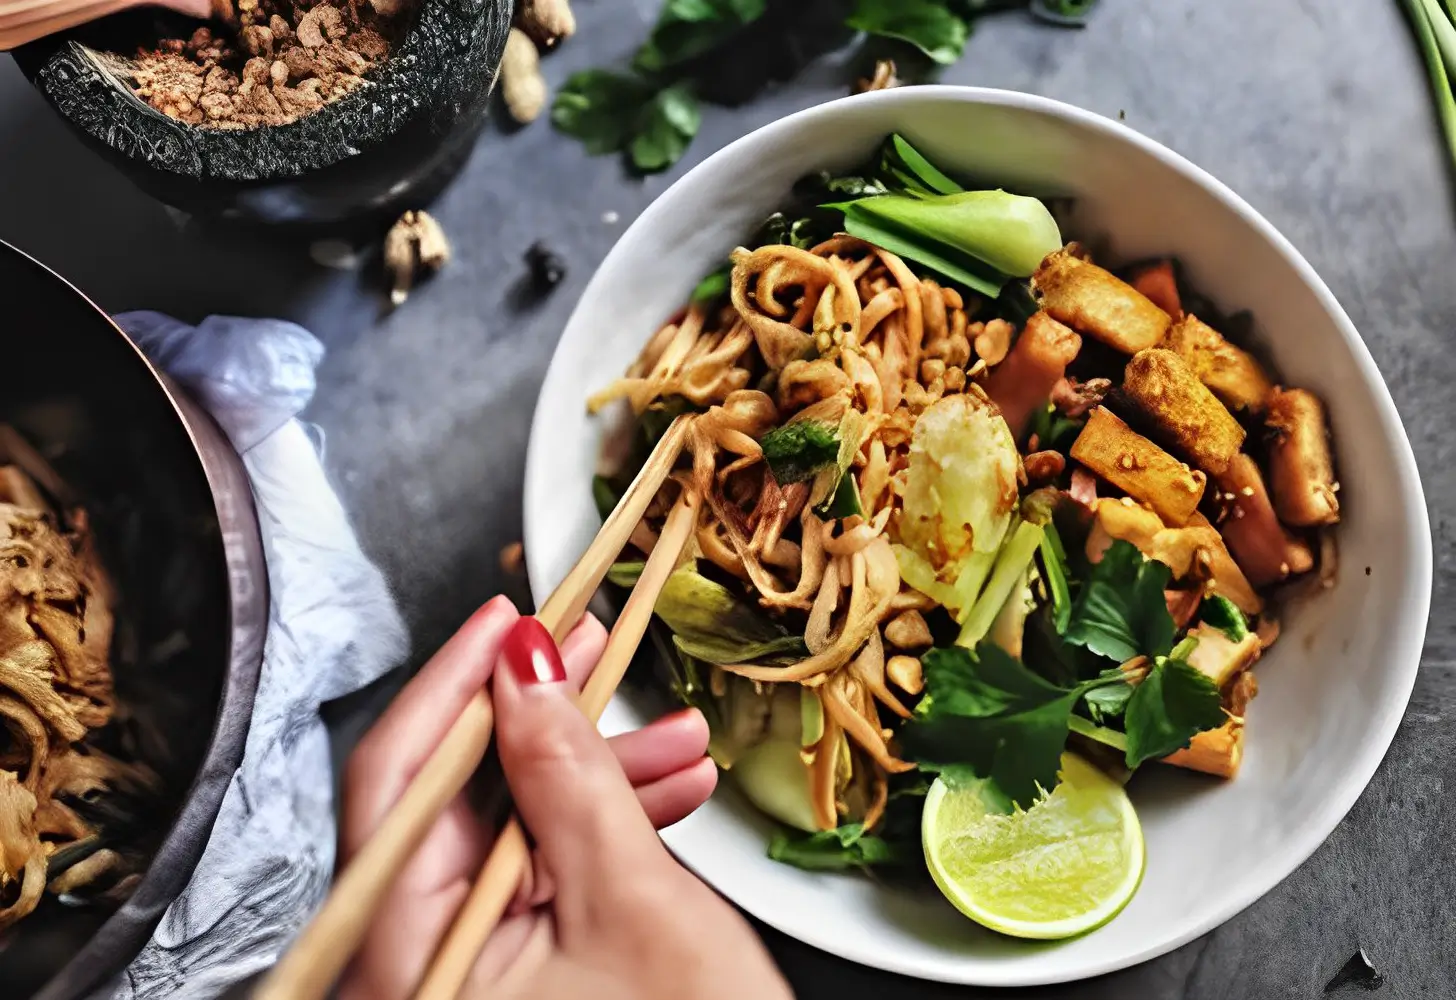 You are currently viewing Deliciously Vegan Pad Thai: A Recipe That Exceeds Expectations